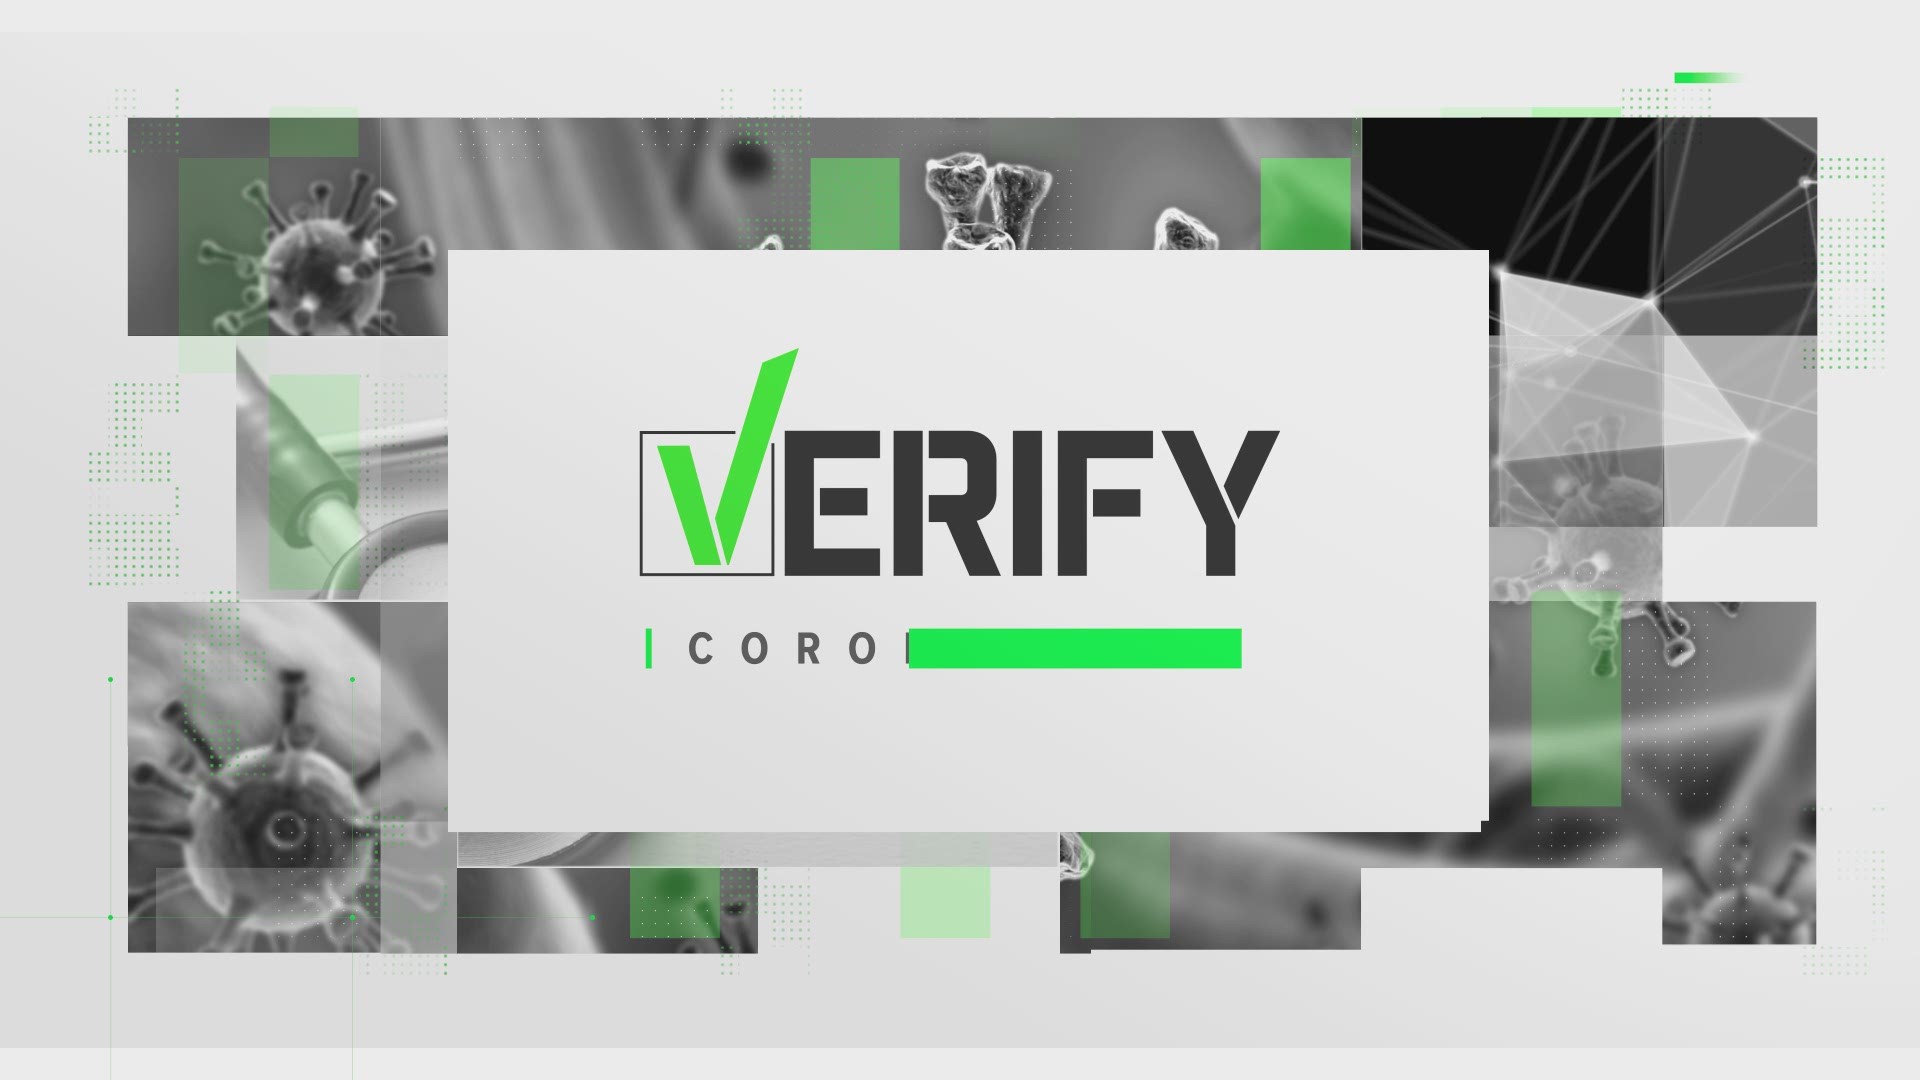 The VERIFY Team spoke with leading experts in the field, to find out whether pharmaceutical companies really have legal immunity, related to vaccine side effects.